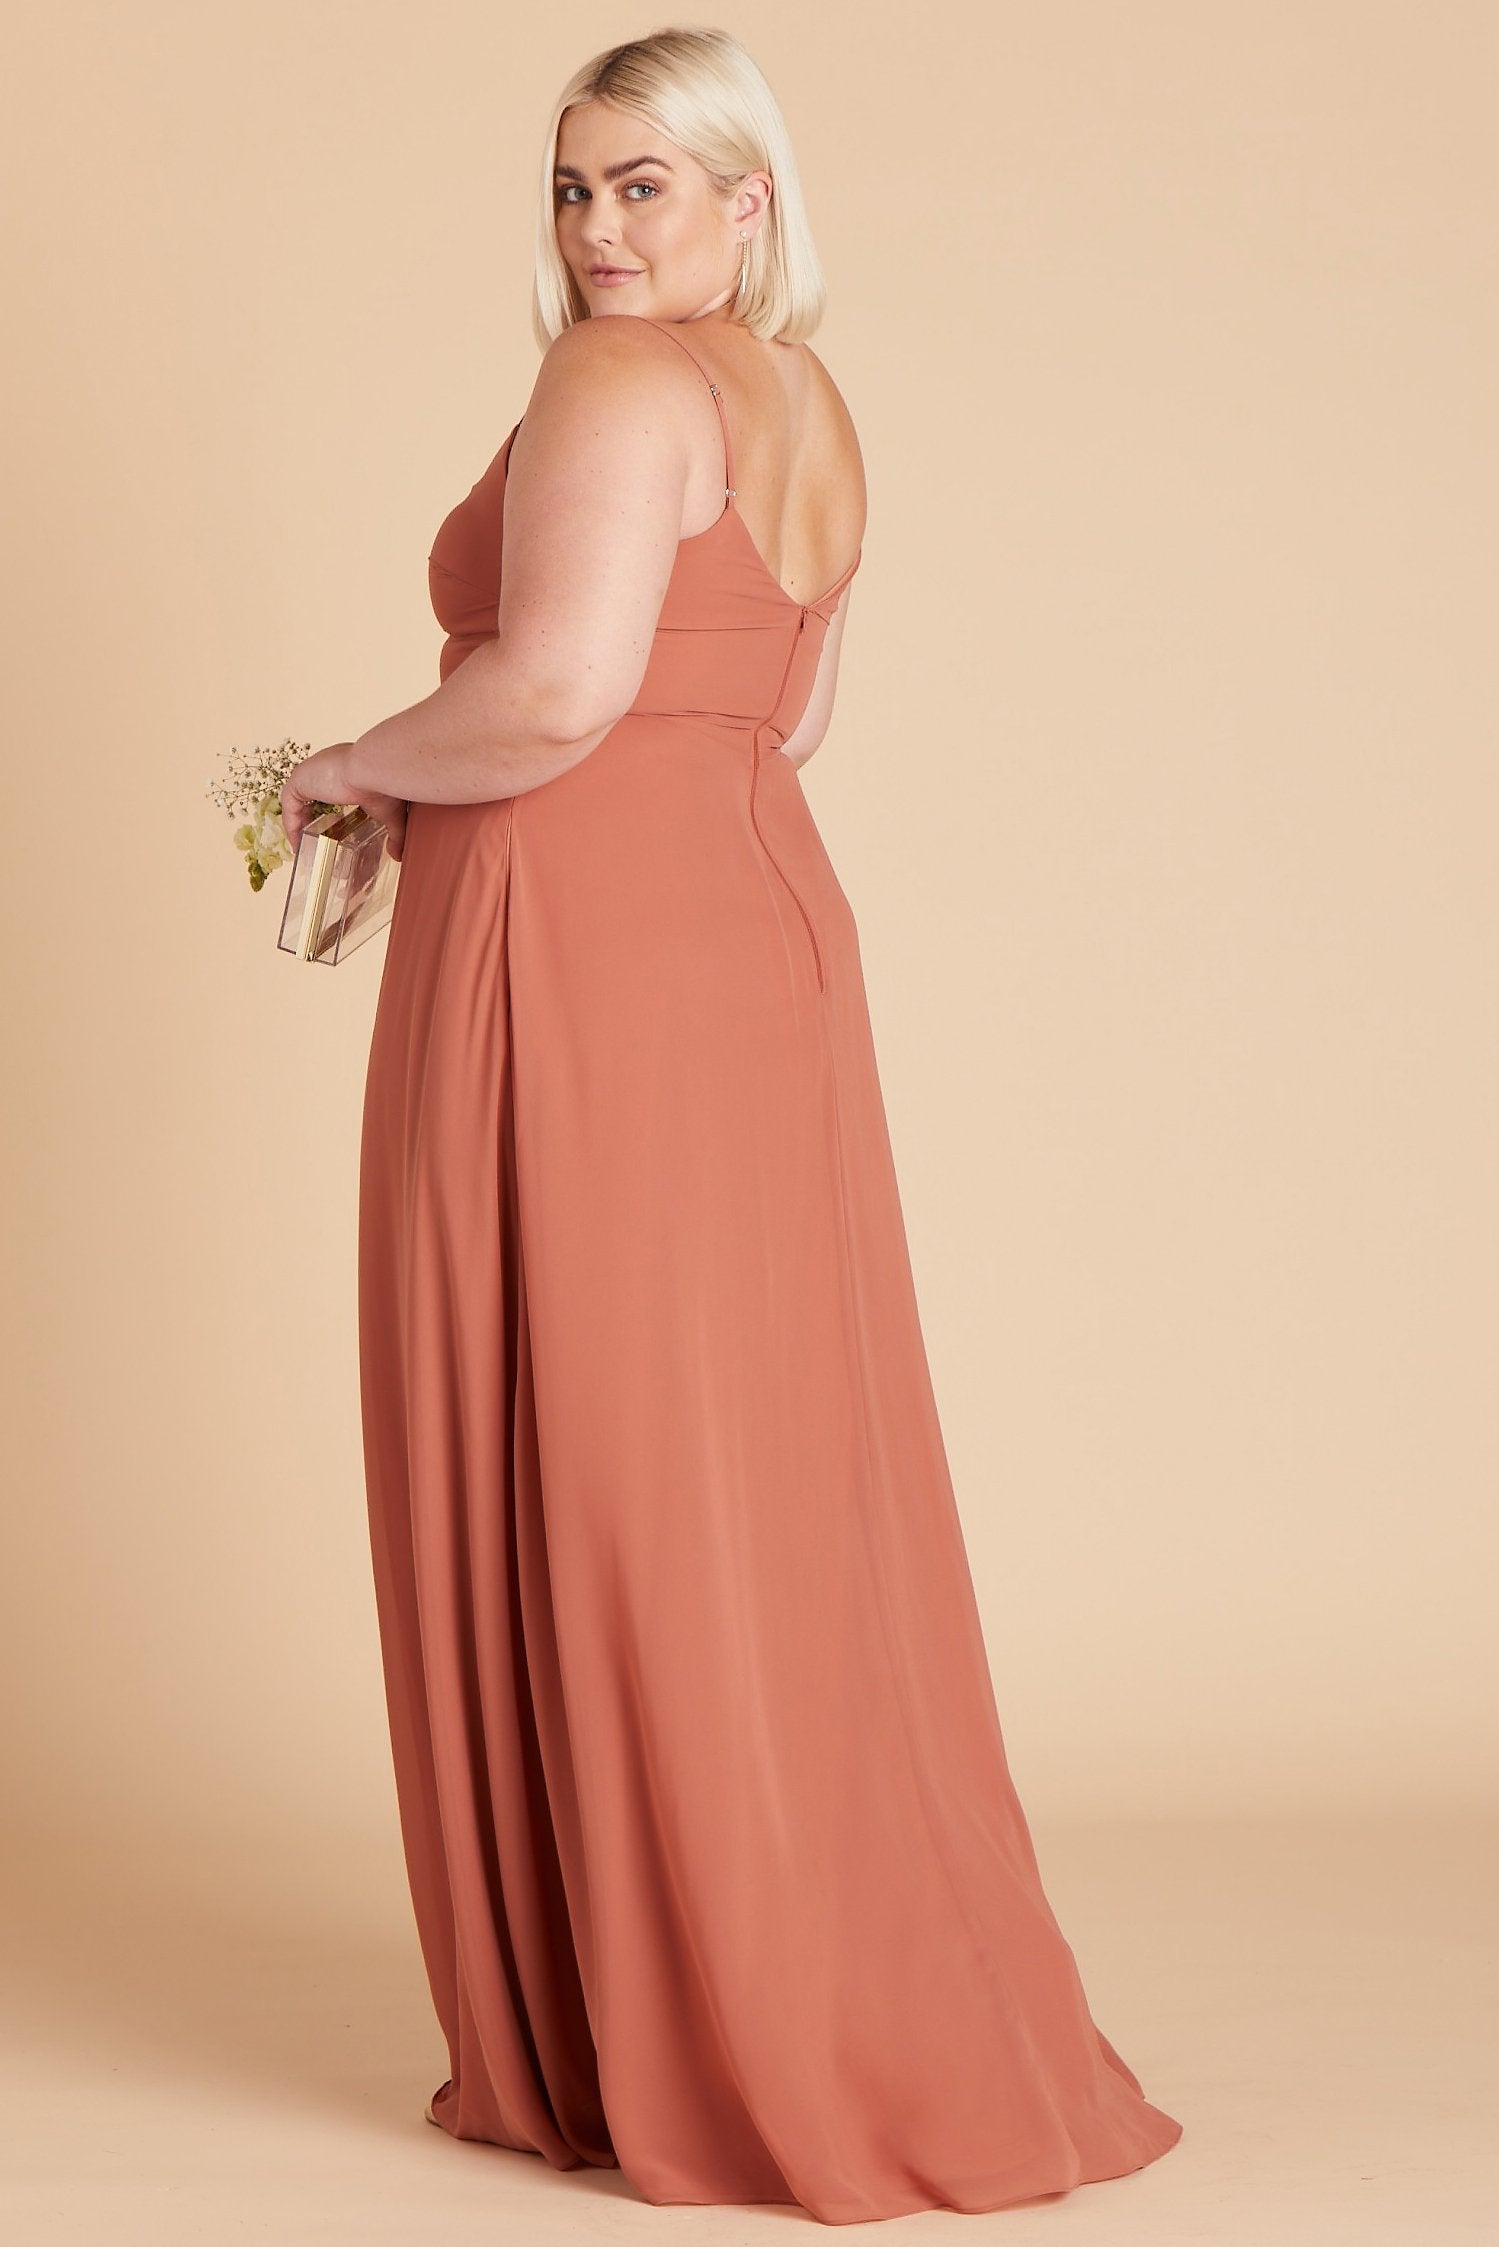 Side view of the floor-length Devin Convertible Plus Size Bridesmaid Dress features a fitted bust and waist with a flowing skirt that moves with the model.